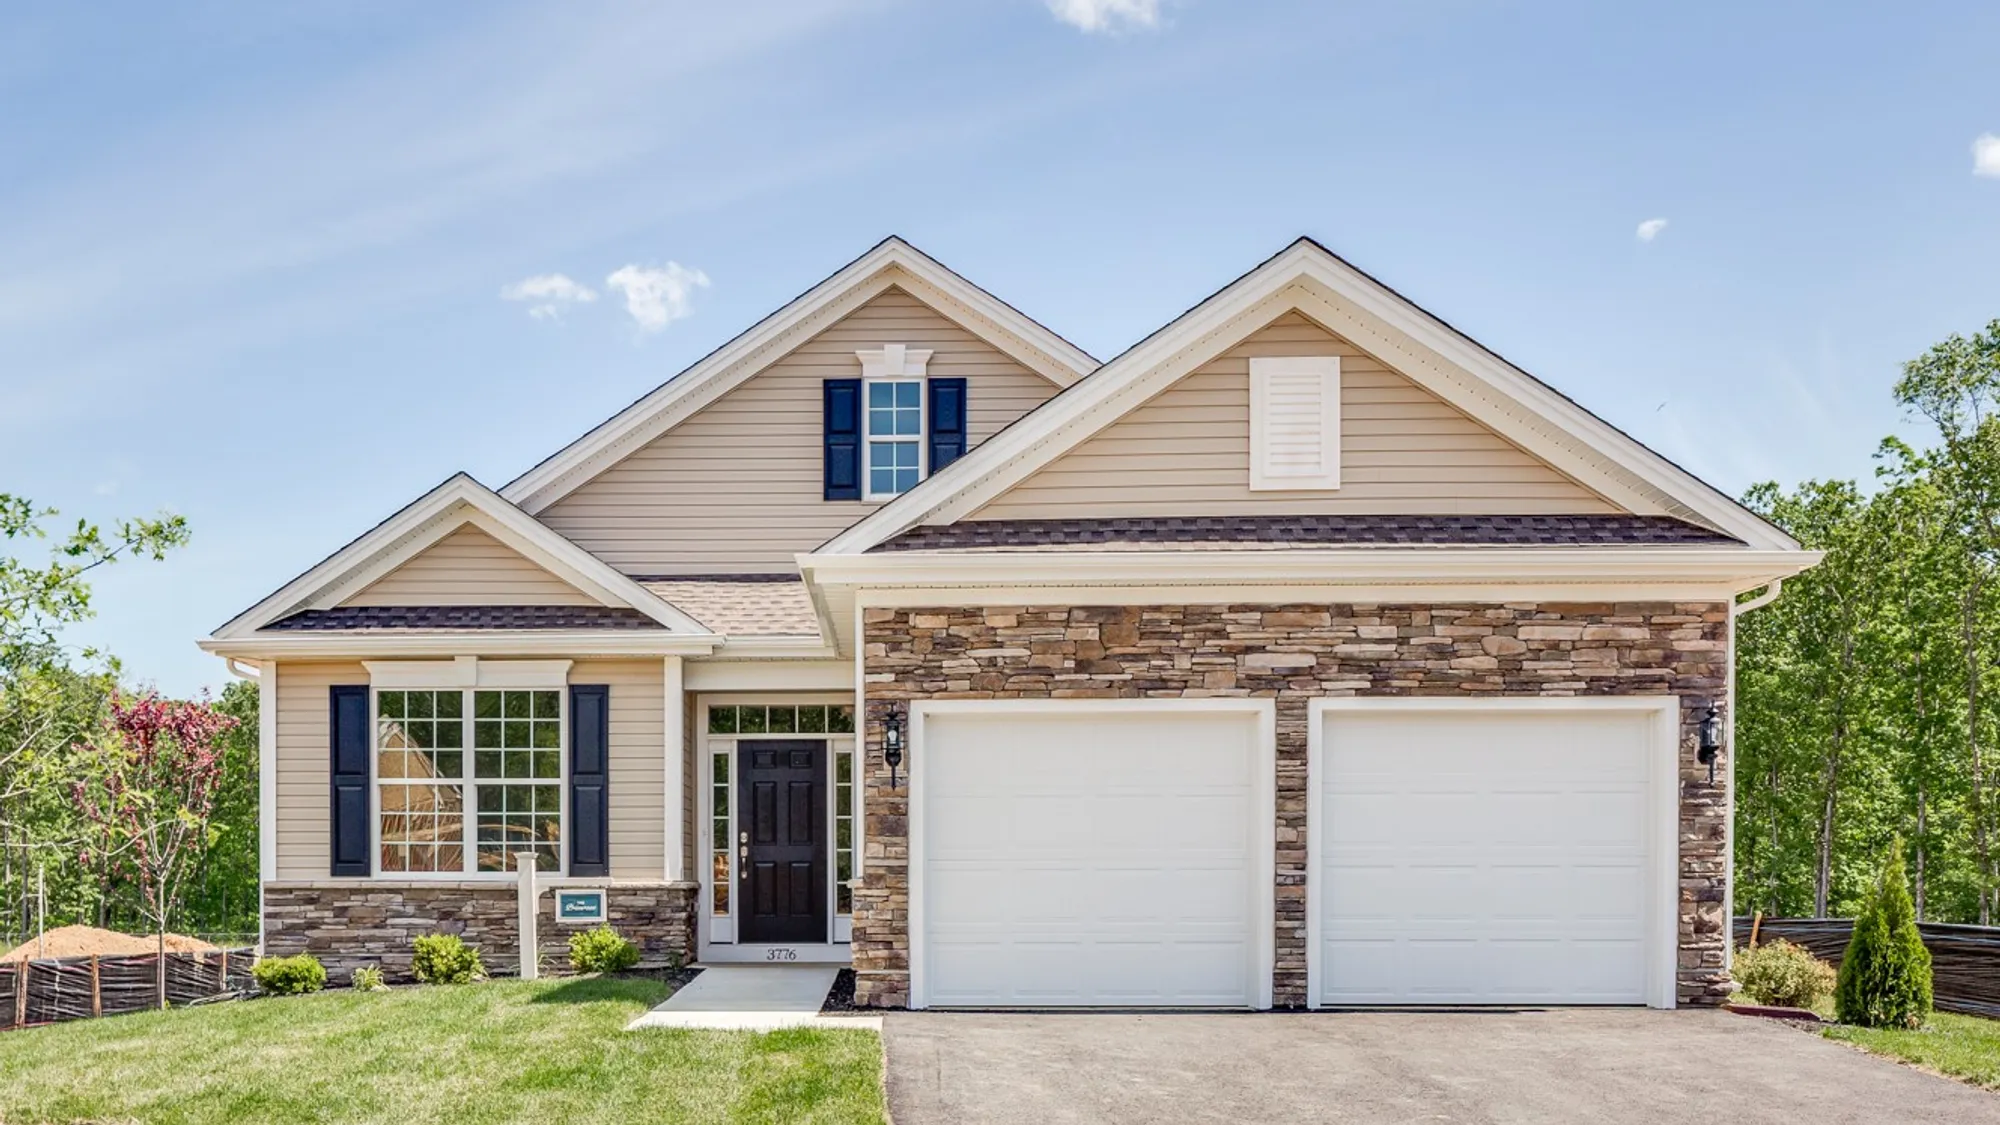 One-story active adult new homes with tan vinyl siding and brick exterior in South Jersey